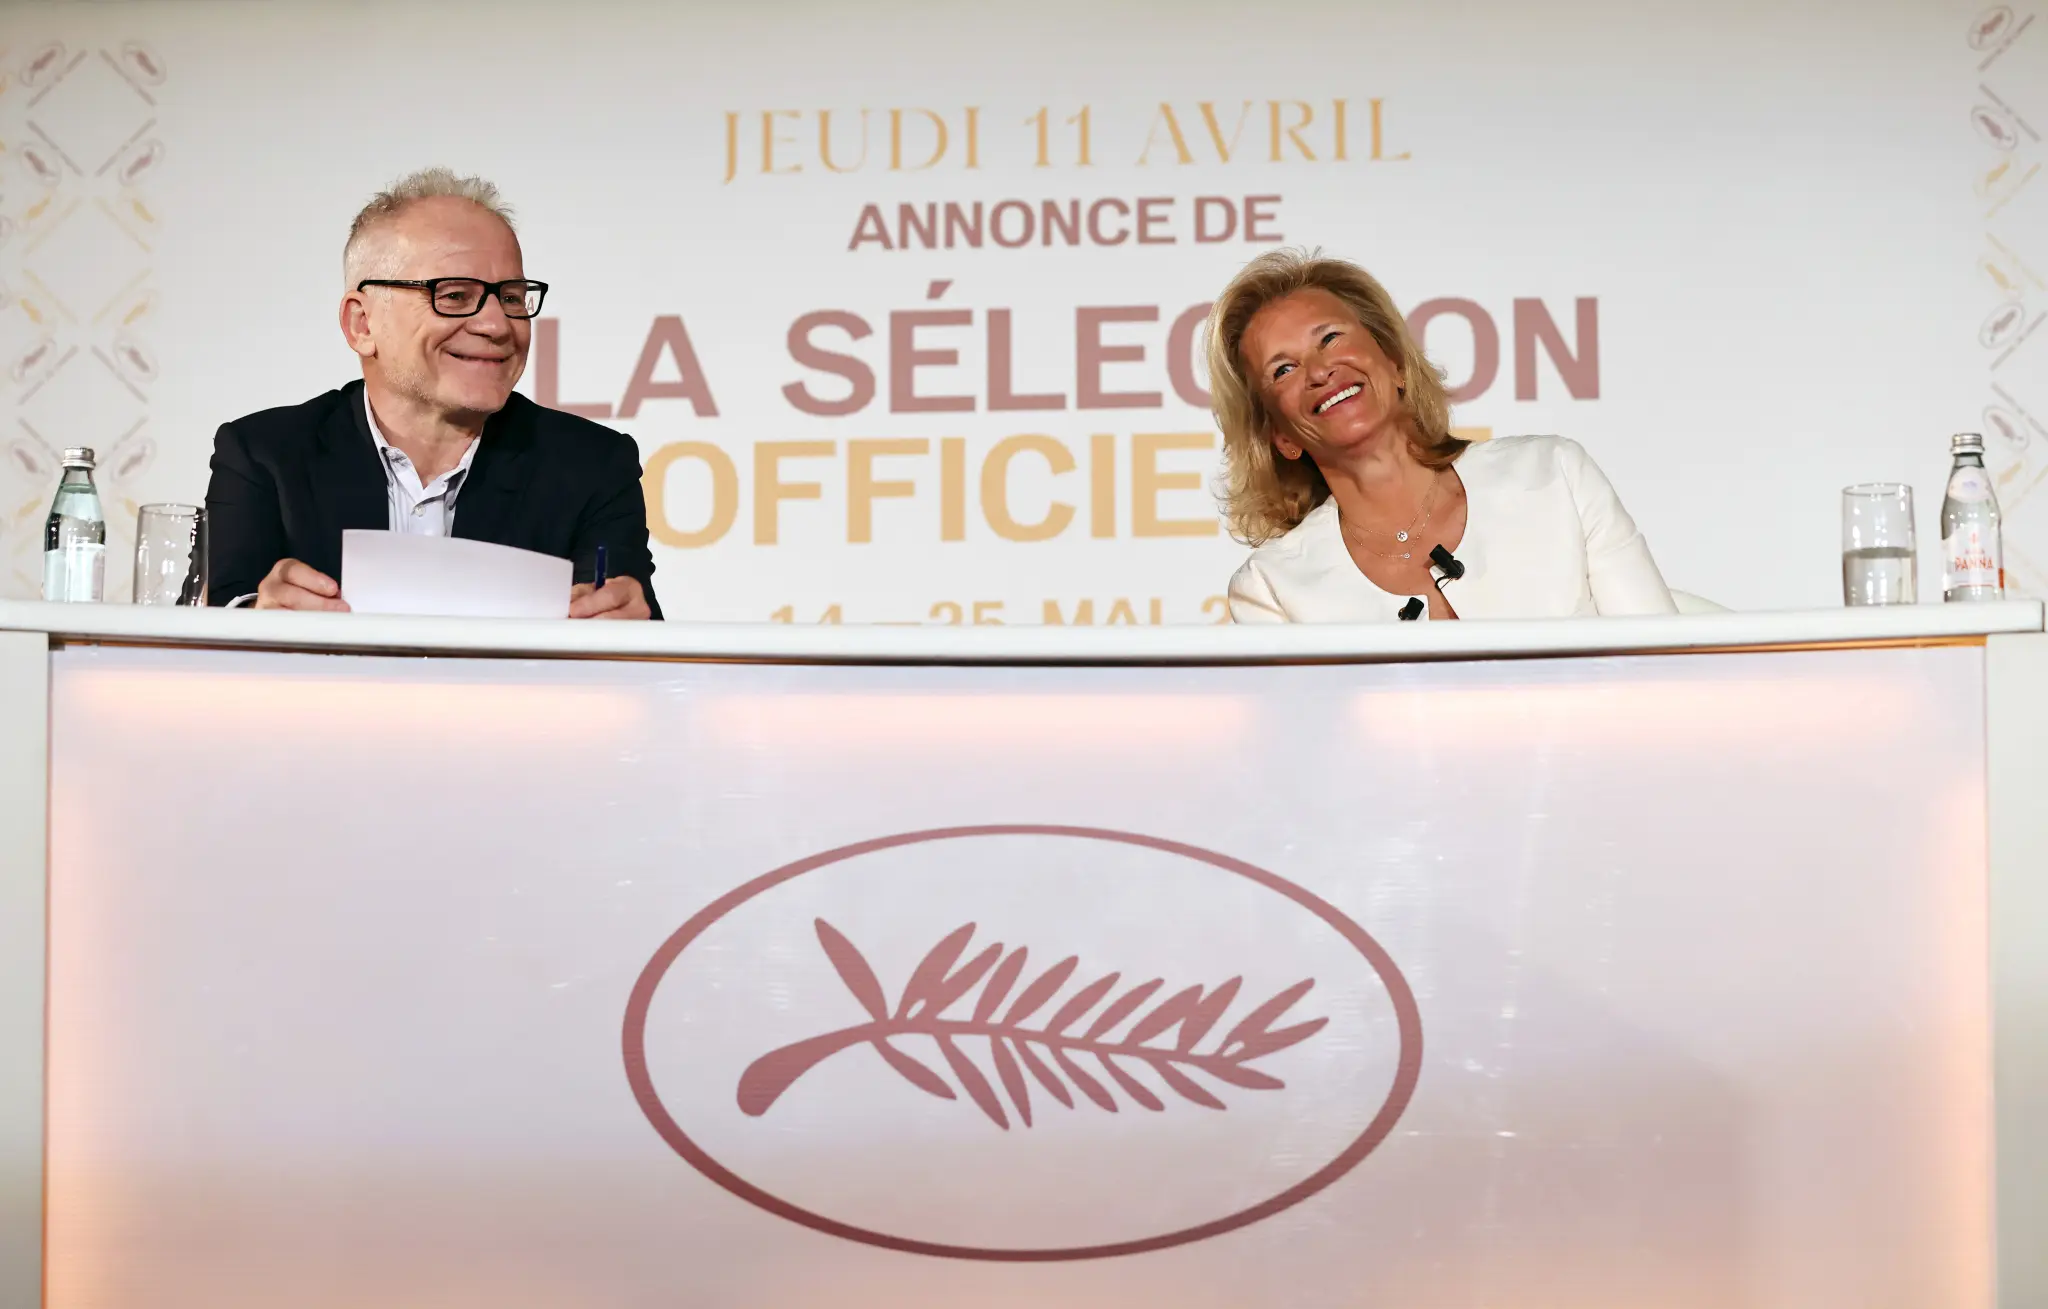 Cannes Film Festival on Edge: Will #MeToo Revelations Shake Up the A-List?